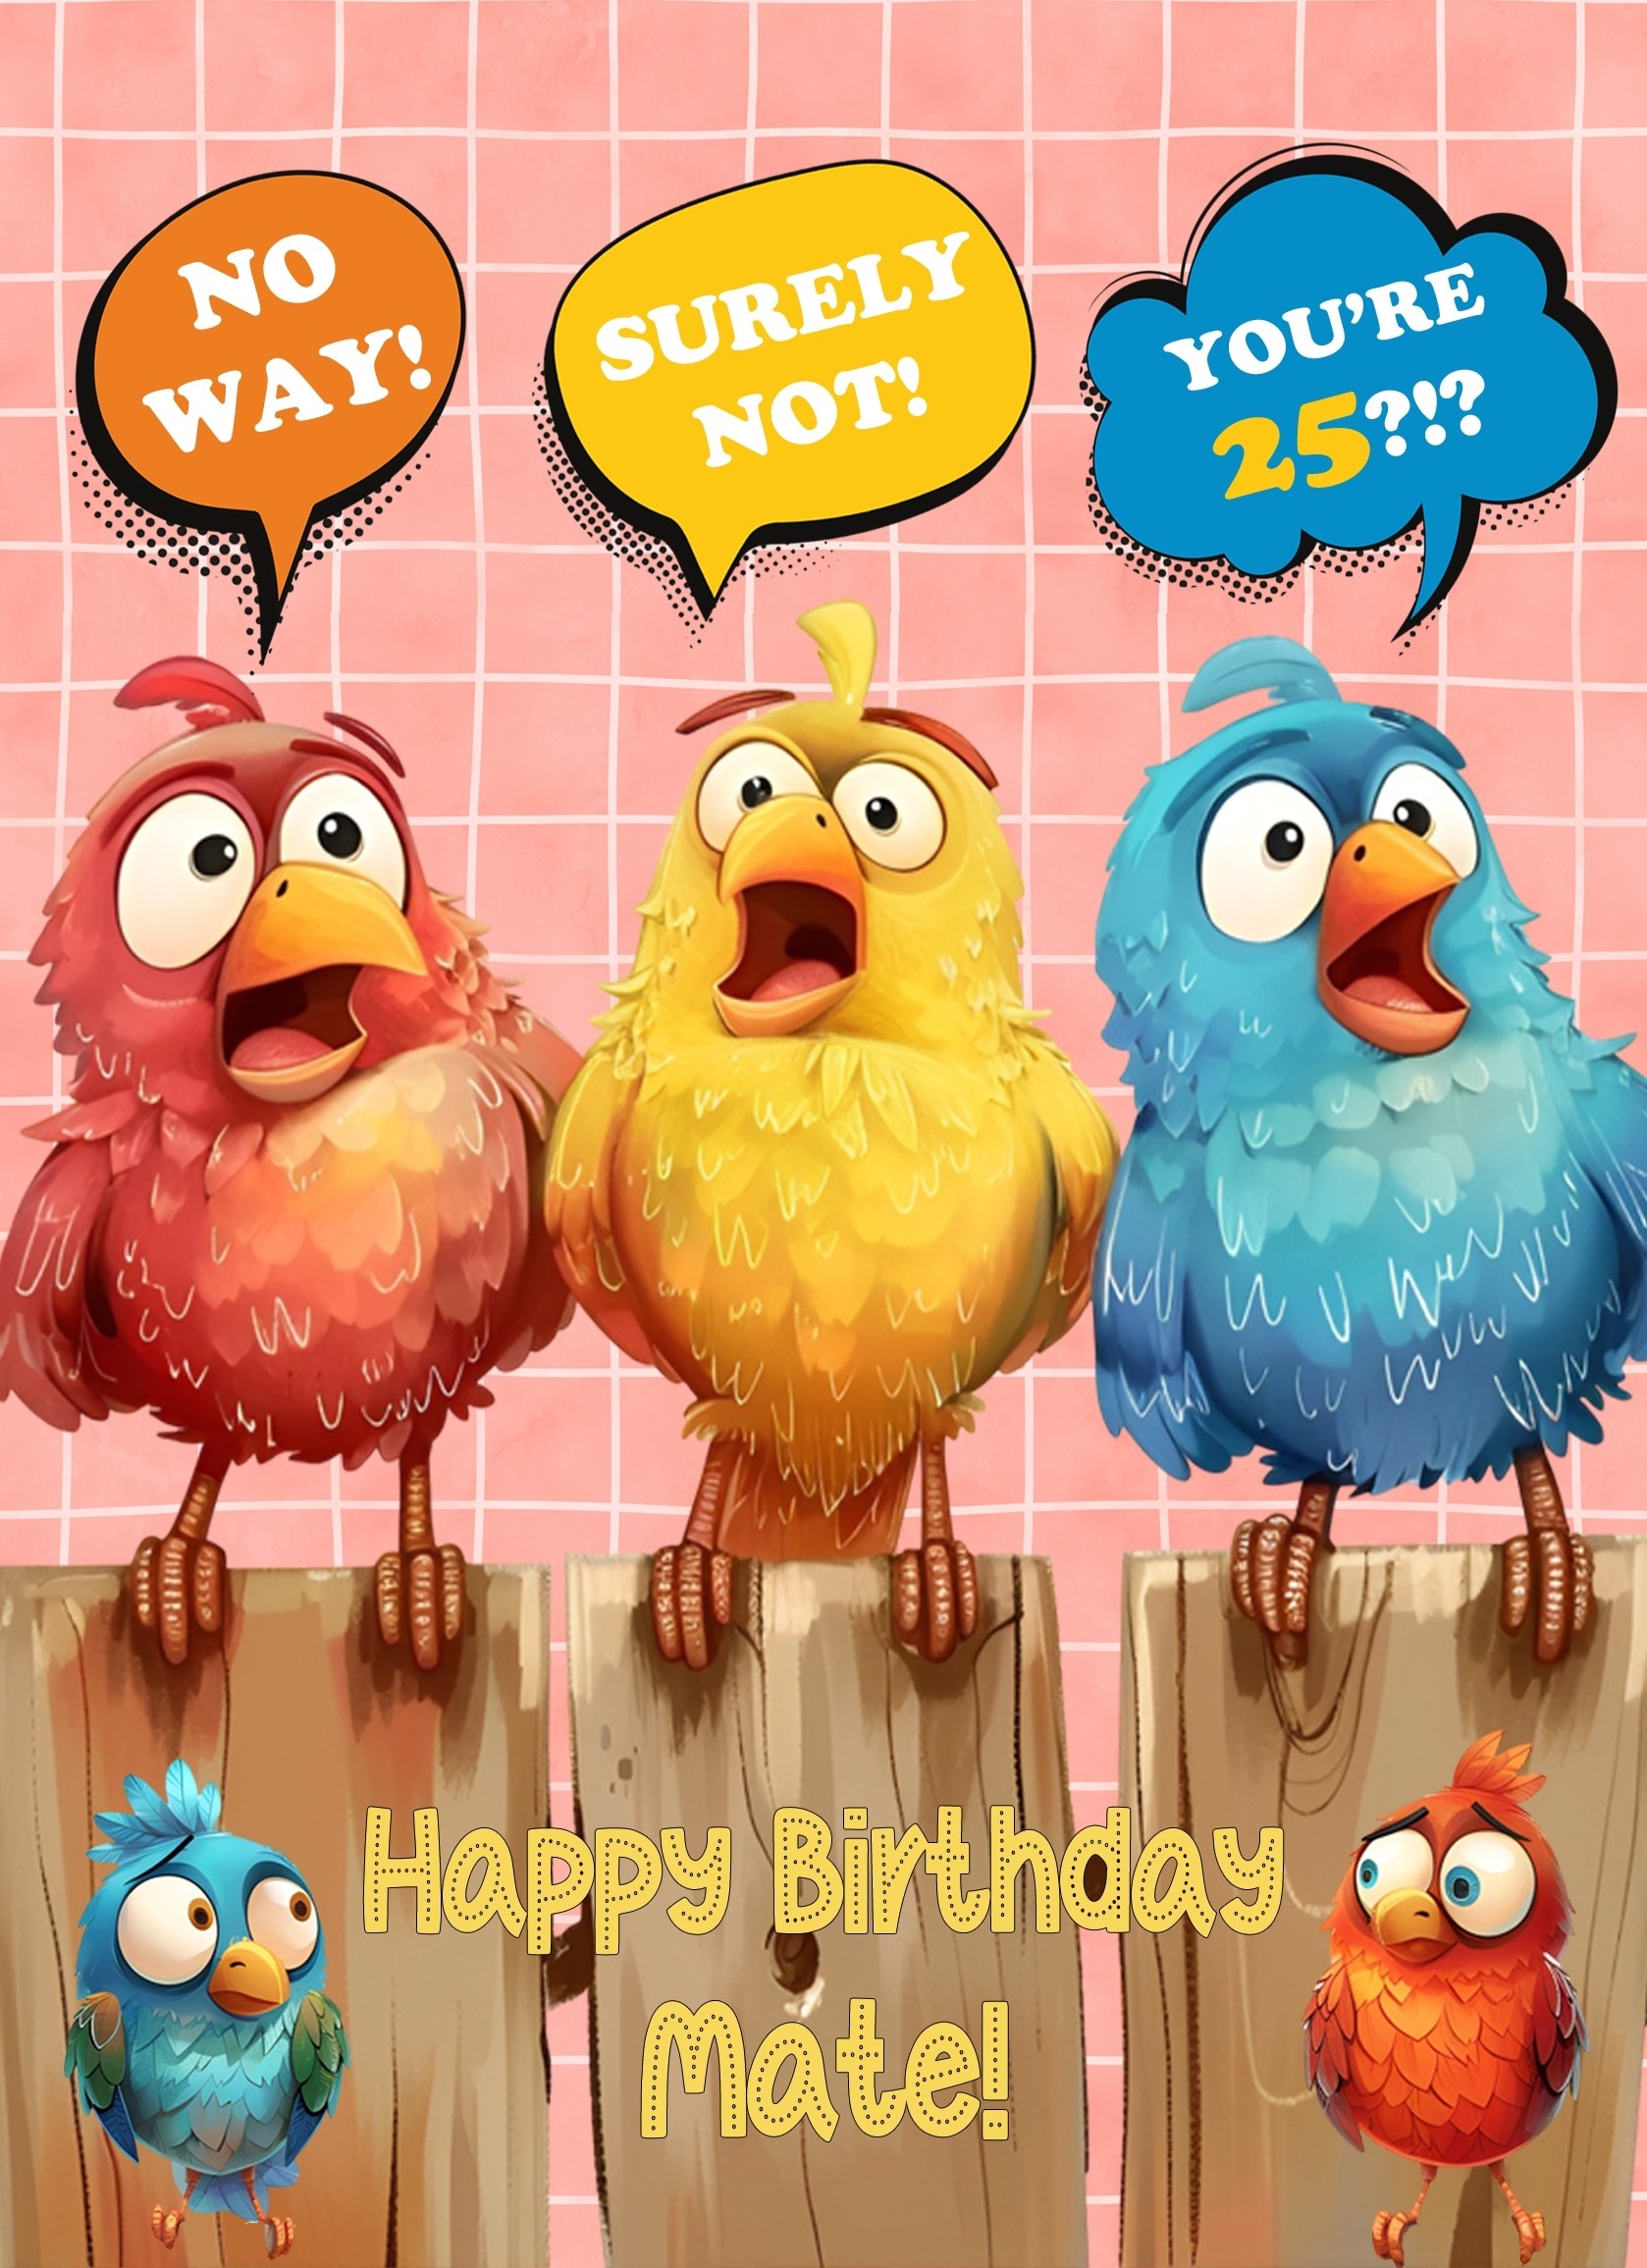 Mate 25th Birthday Card (Funny Birds Surprised)